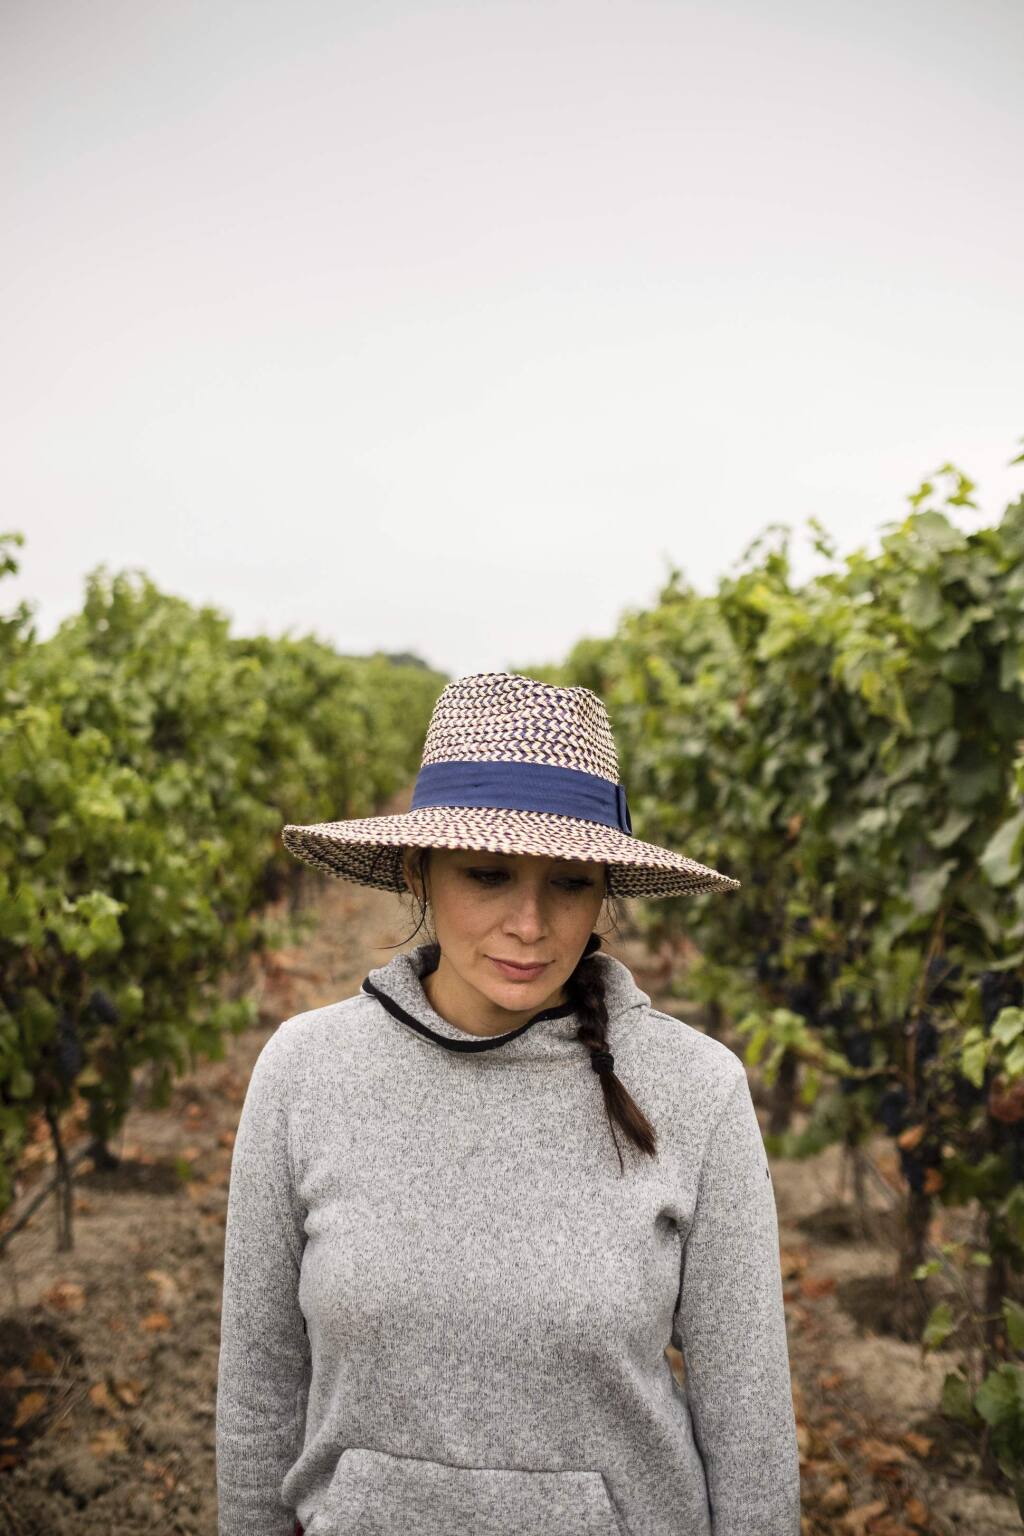 In this Aug. 24, 2017, photo provided by Quiet Pictures, Vanessa Robledo, a Mexican American grape grower and entrepreneur, walks through one her mother's three vineyards in Napa. 'Harvest Season,' a new PBS documentary, examines the contributions of Mexican Americans in the wine industry of California's Napa Valley. (Roberto 'Bear' Guerra/Quiet Pictures via AP)